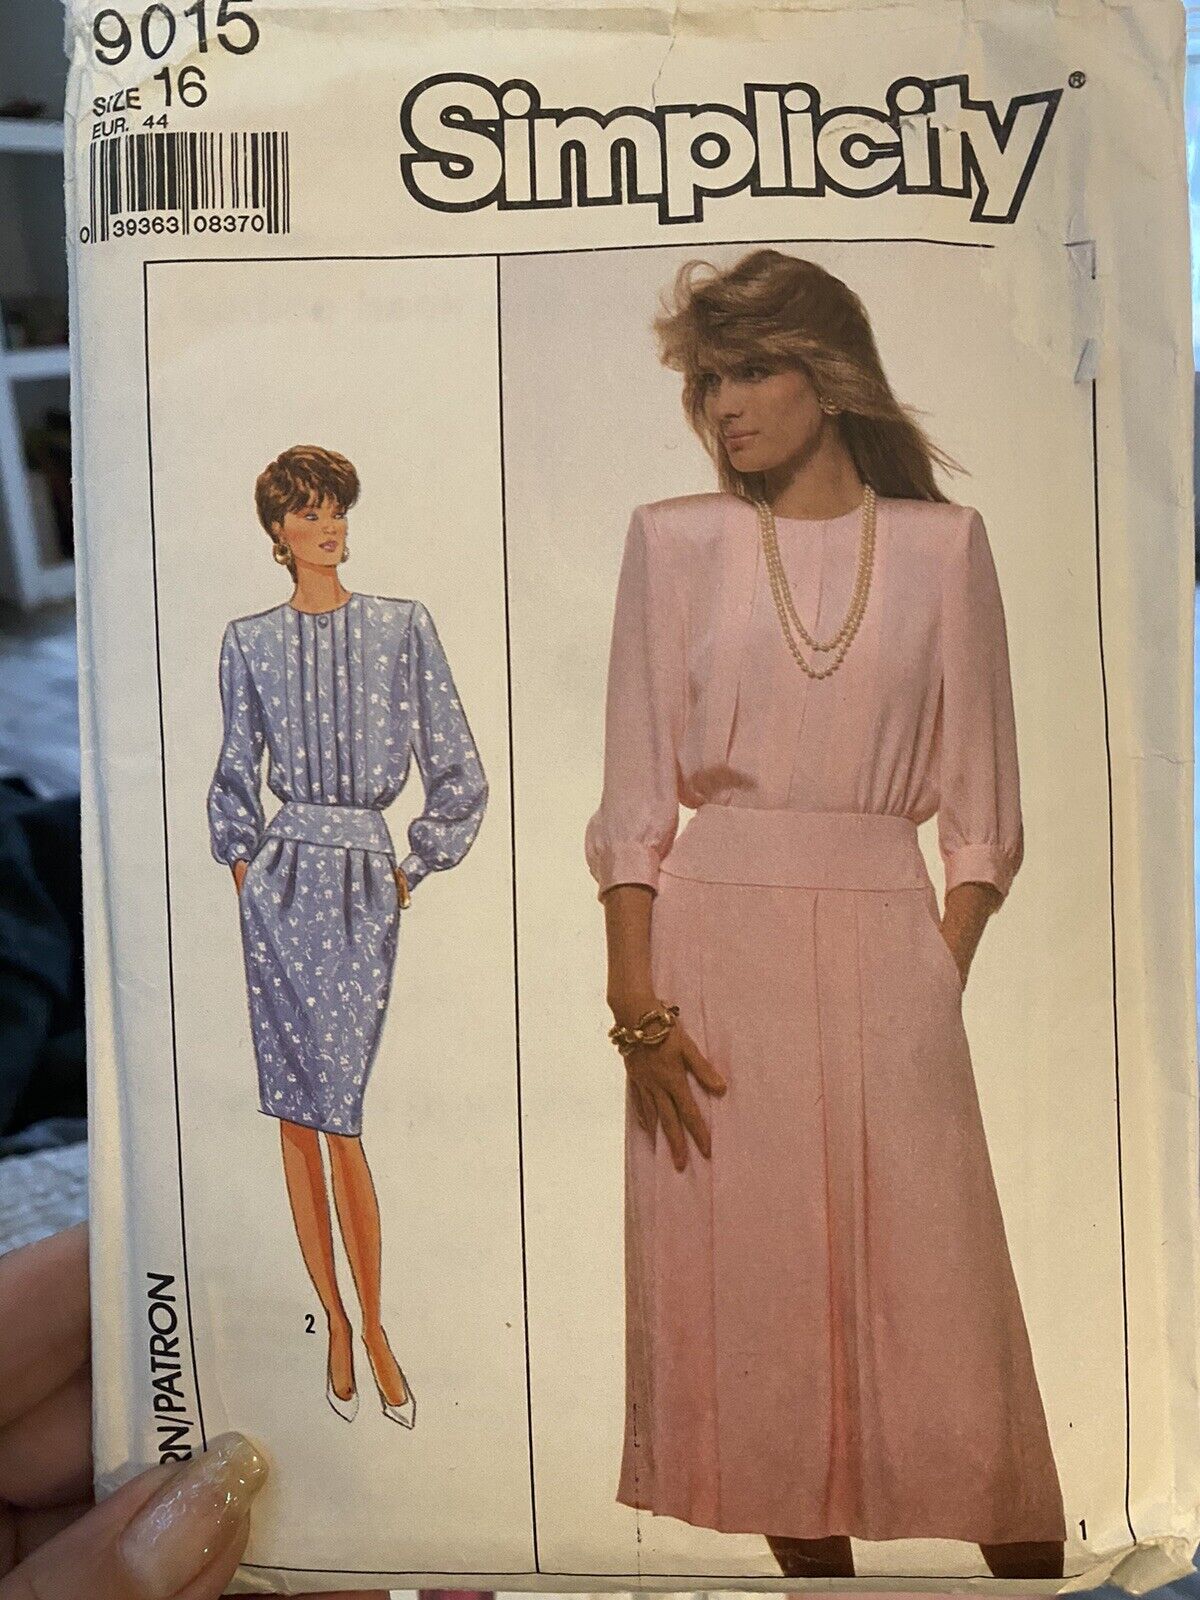 1989 Simplicity 9015 Vintage Sewing Pattern Womens Dress Size 16